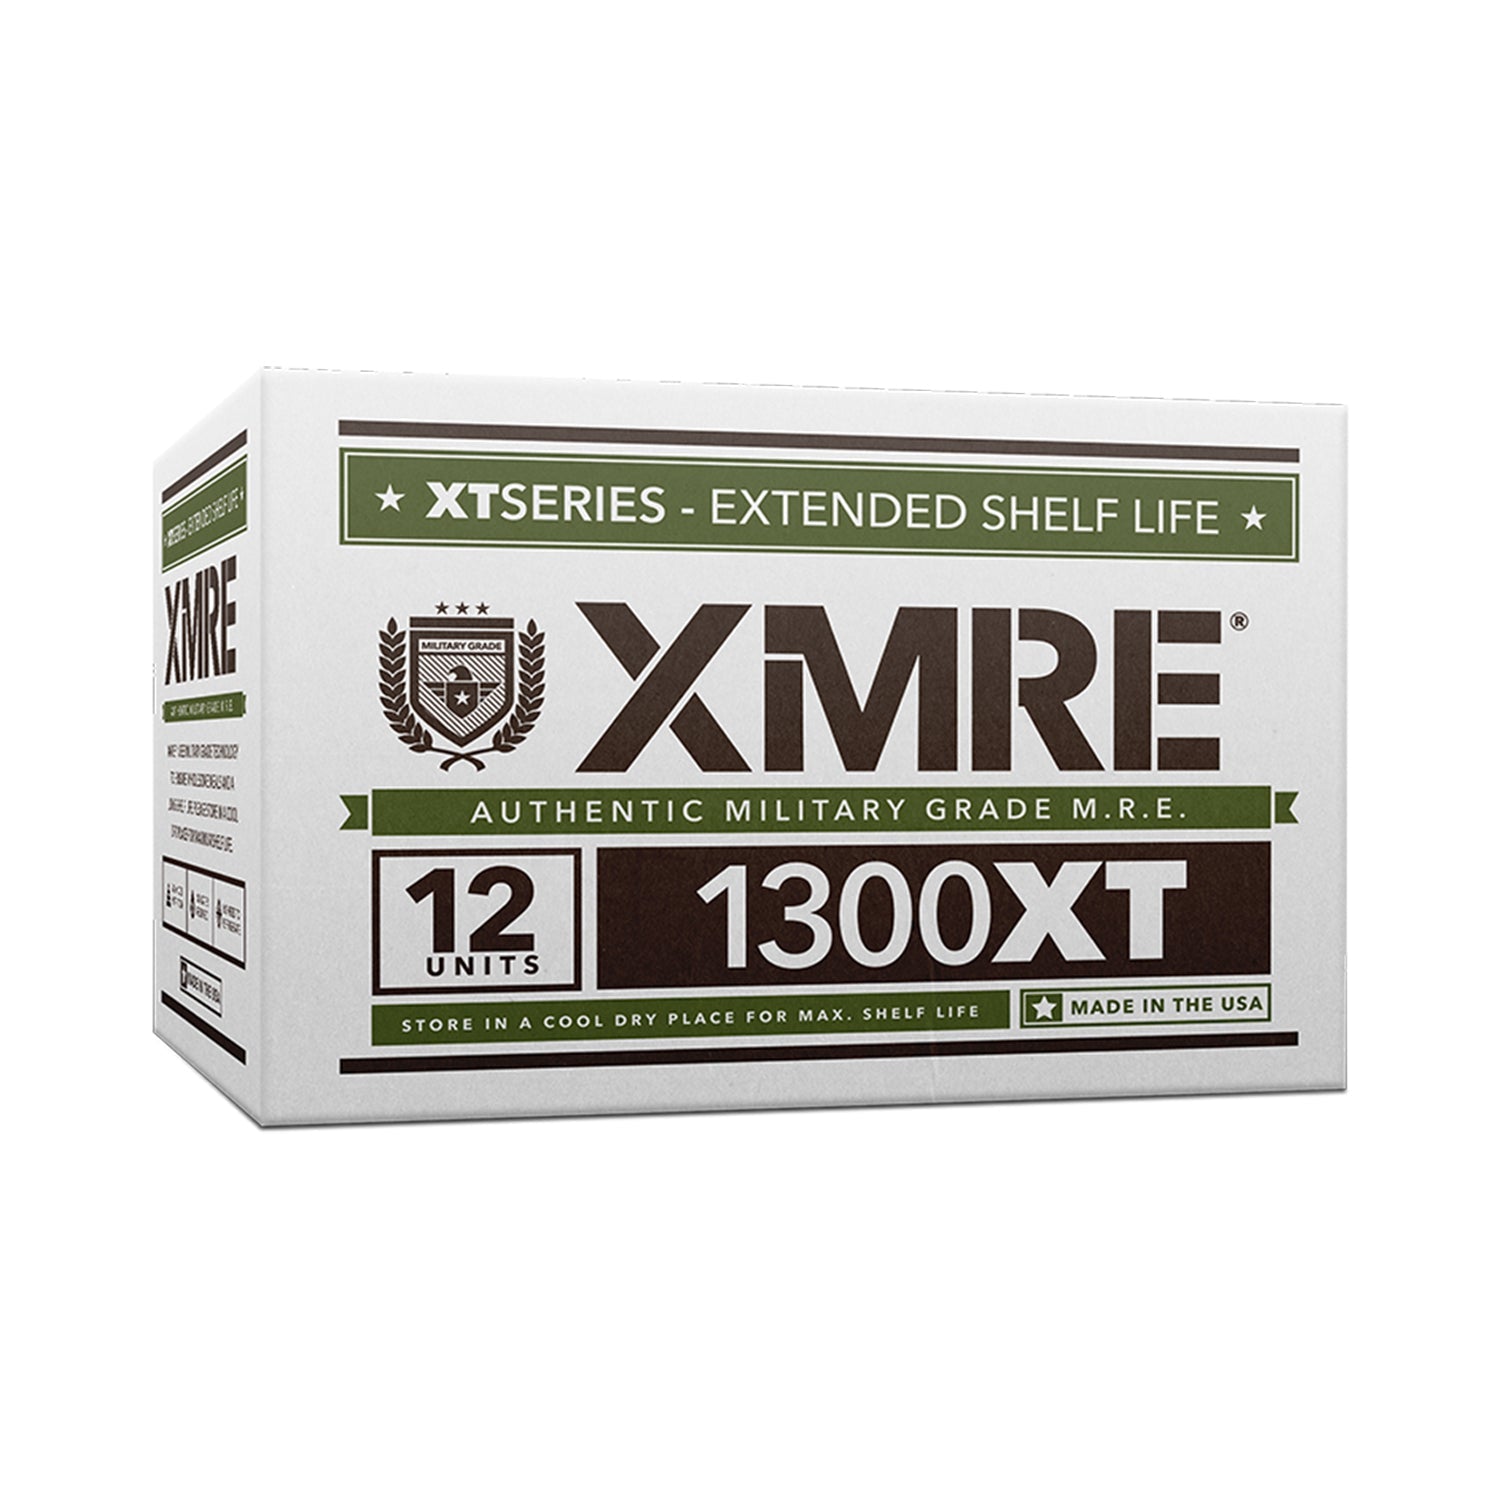 xmre meals 1300xt - 12 case with heaters (meal ready to eat - military grade)